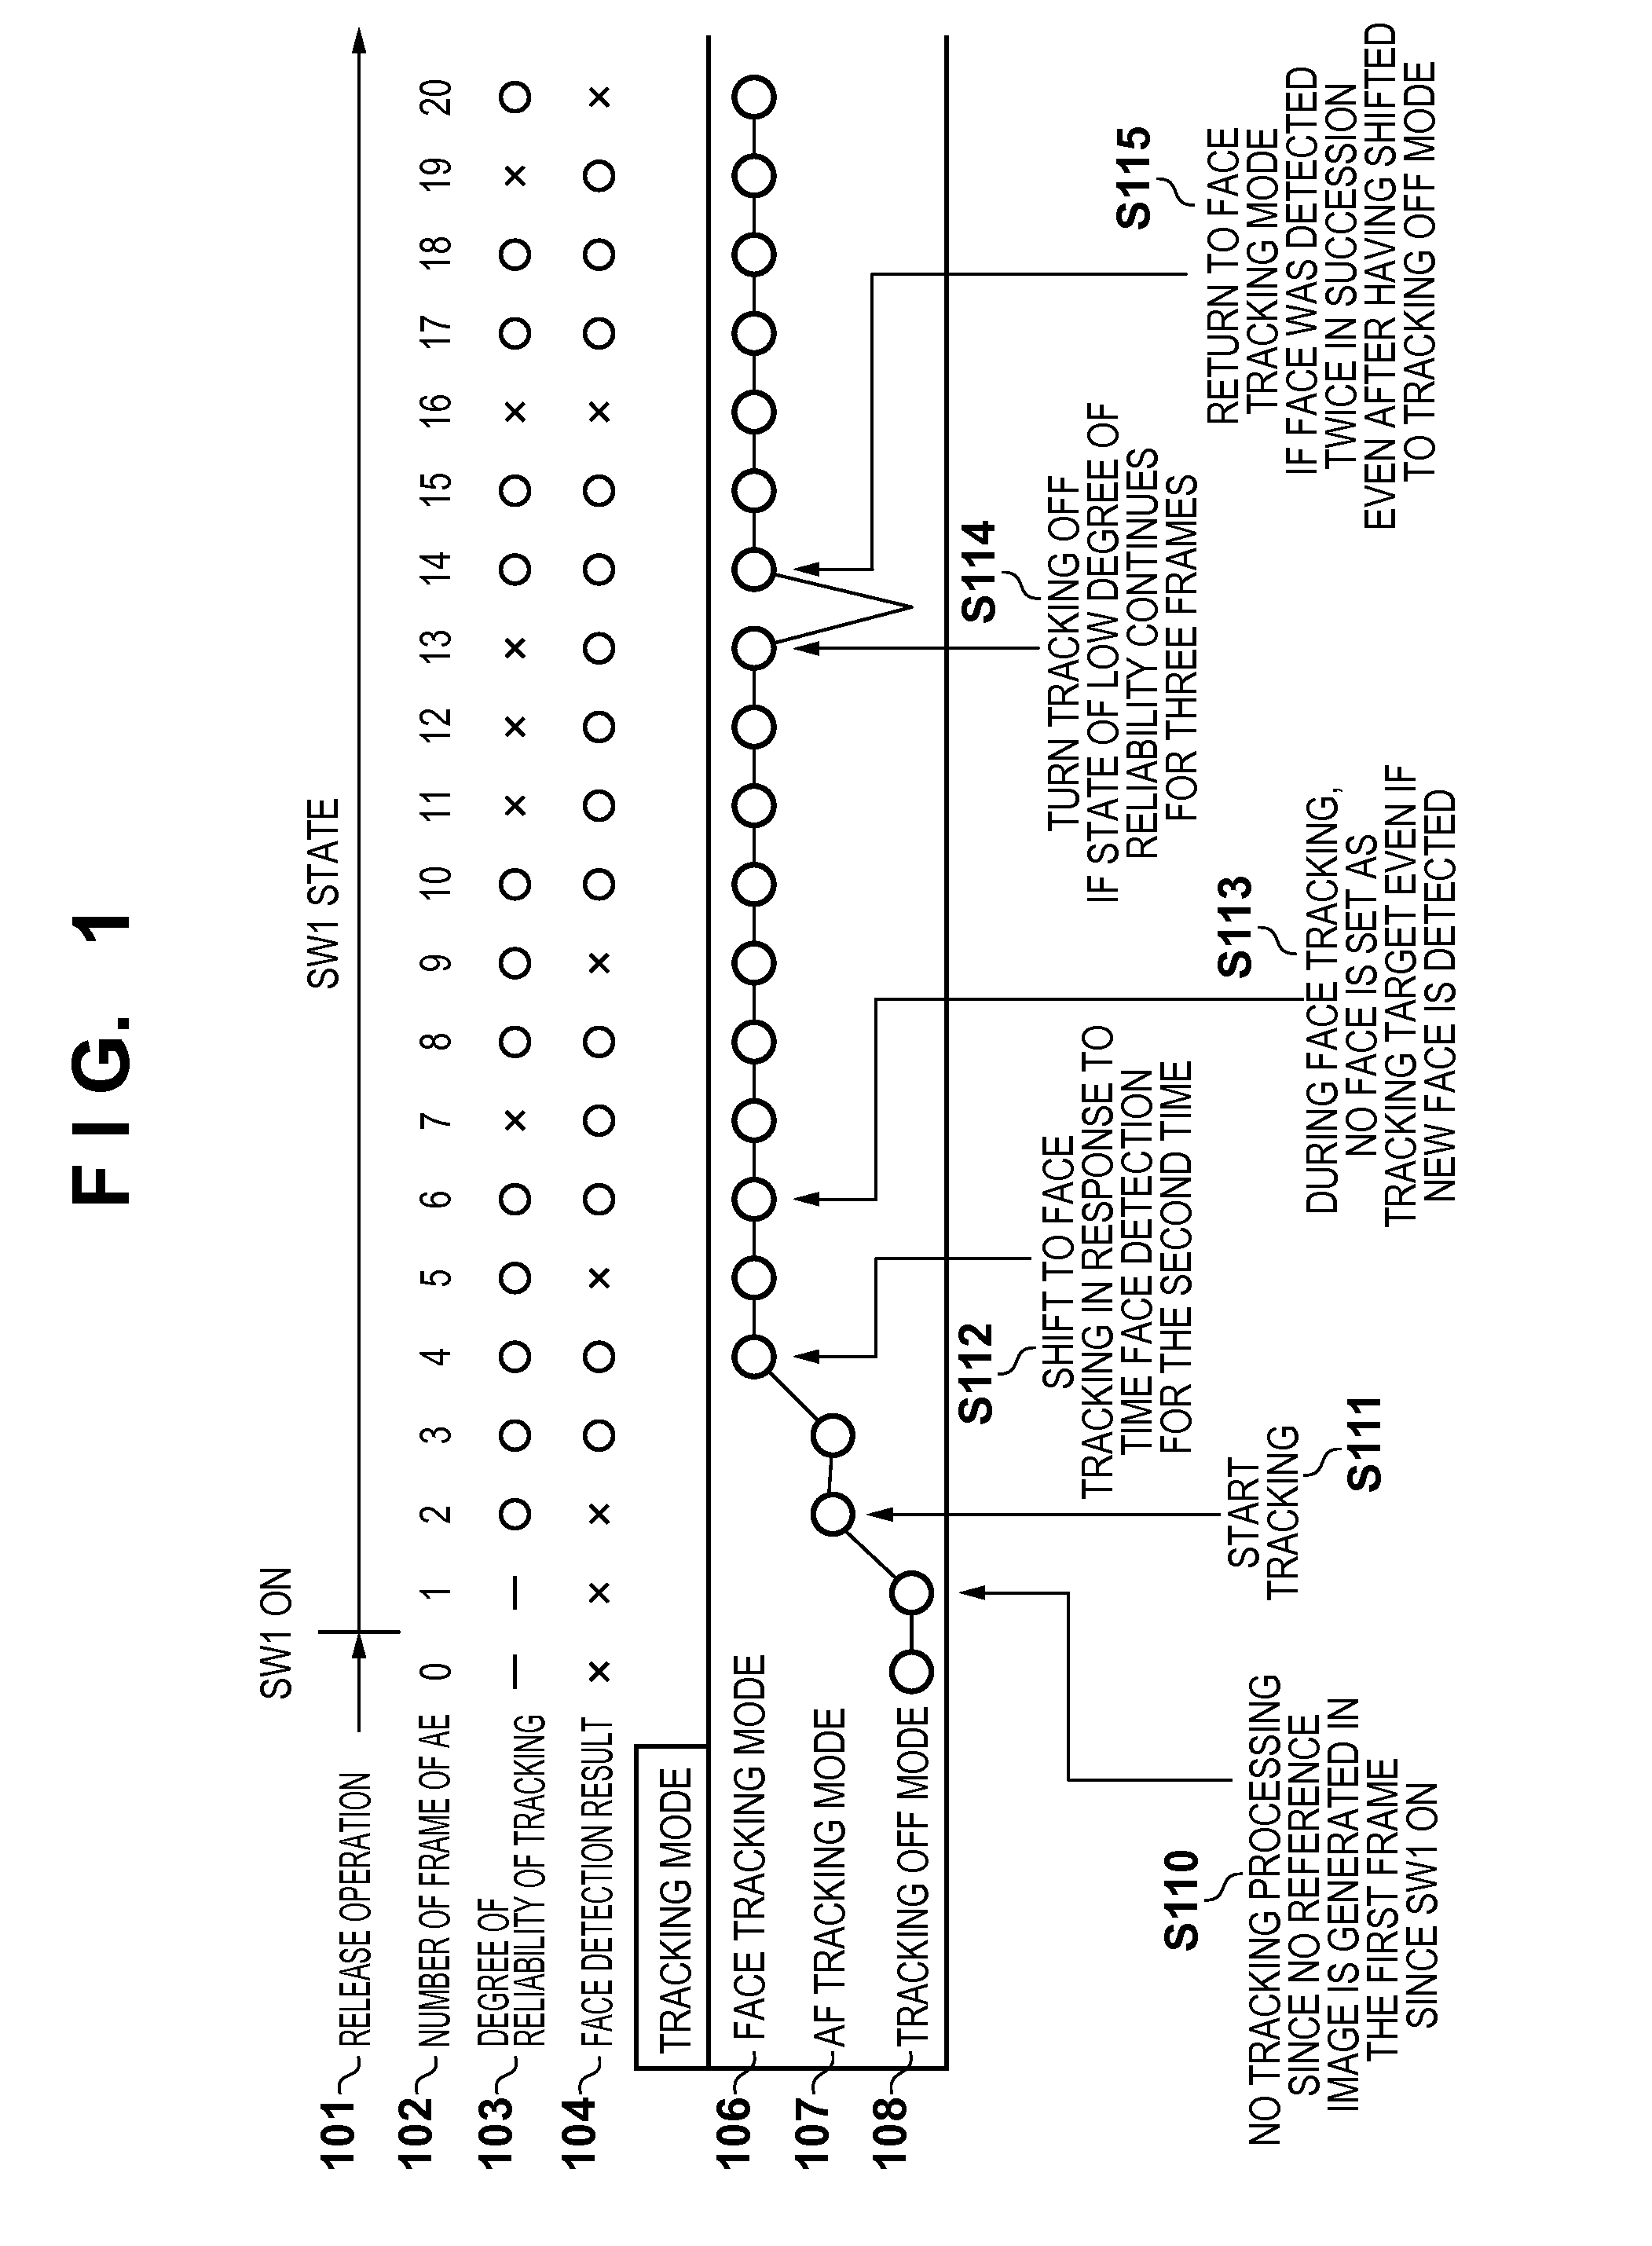 Image capture apparatus and method for controlling the same